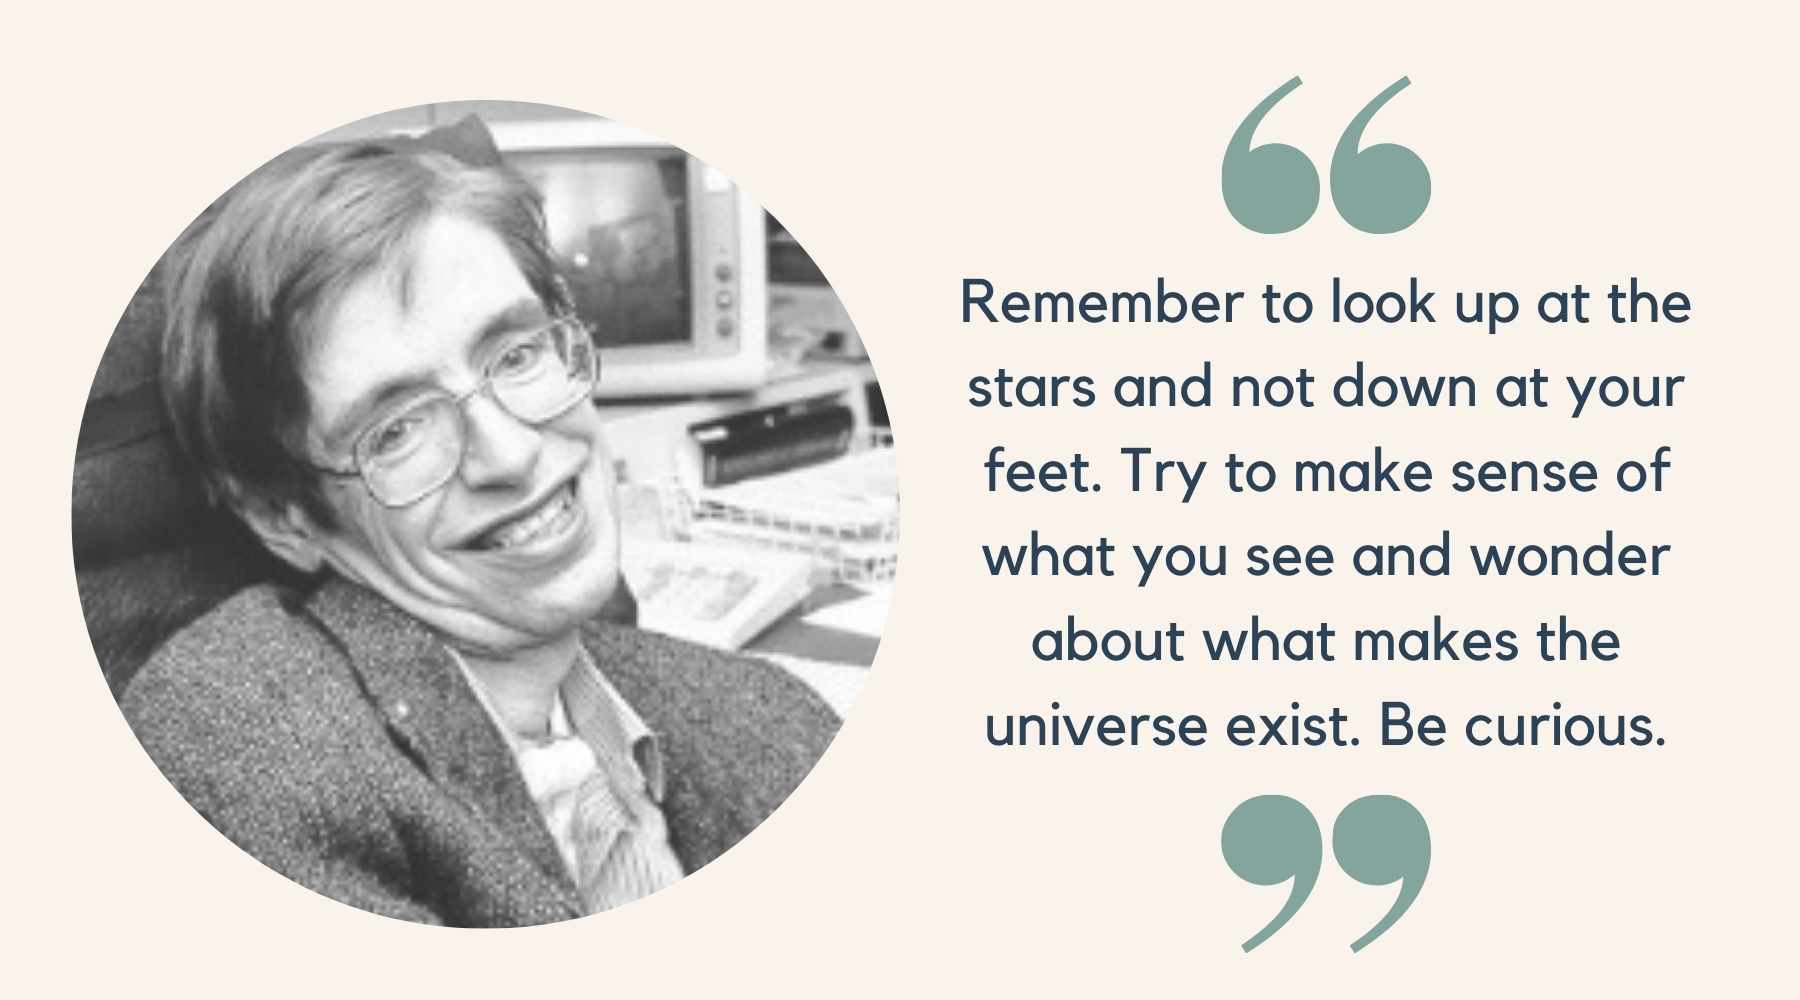 Stephen hawking curious be curious remember to look up at the stars and not down at your feet